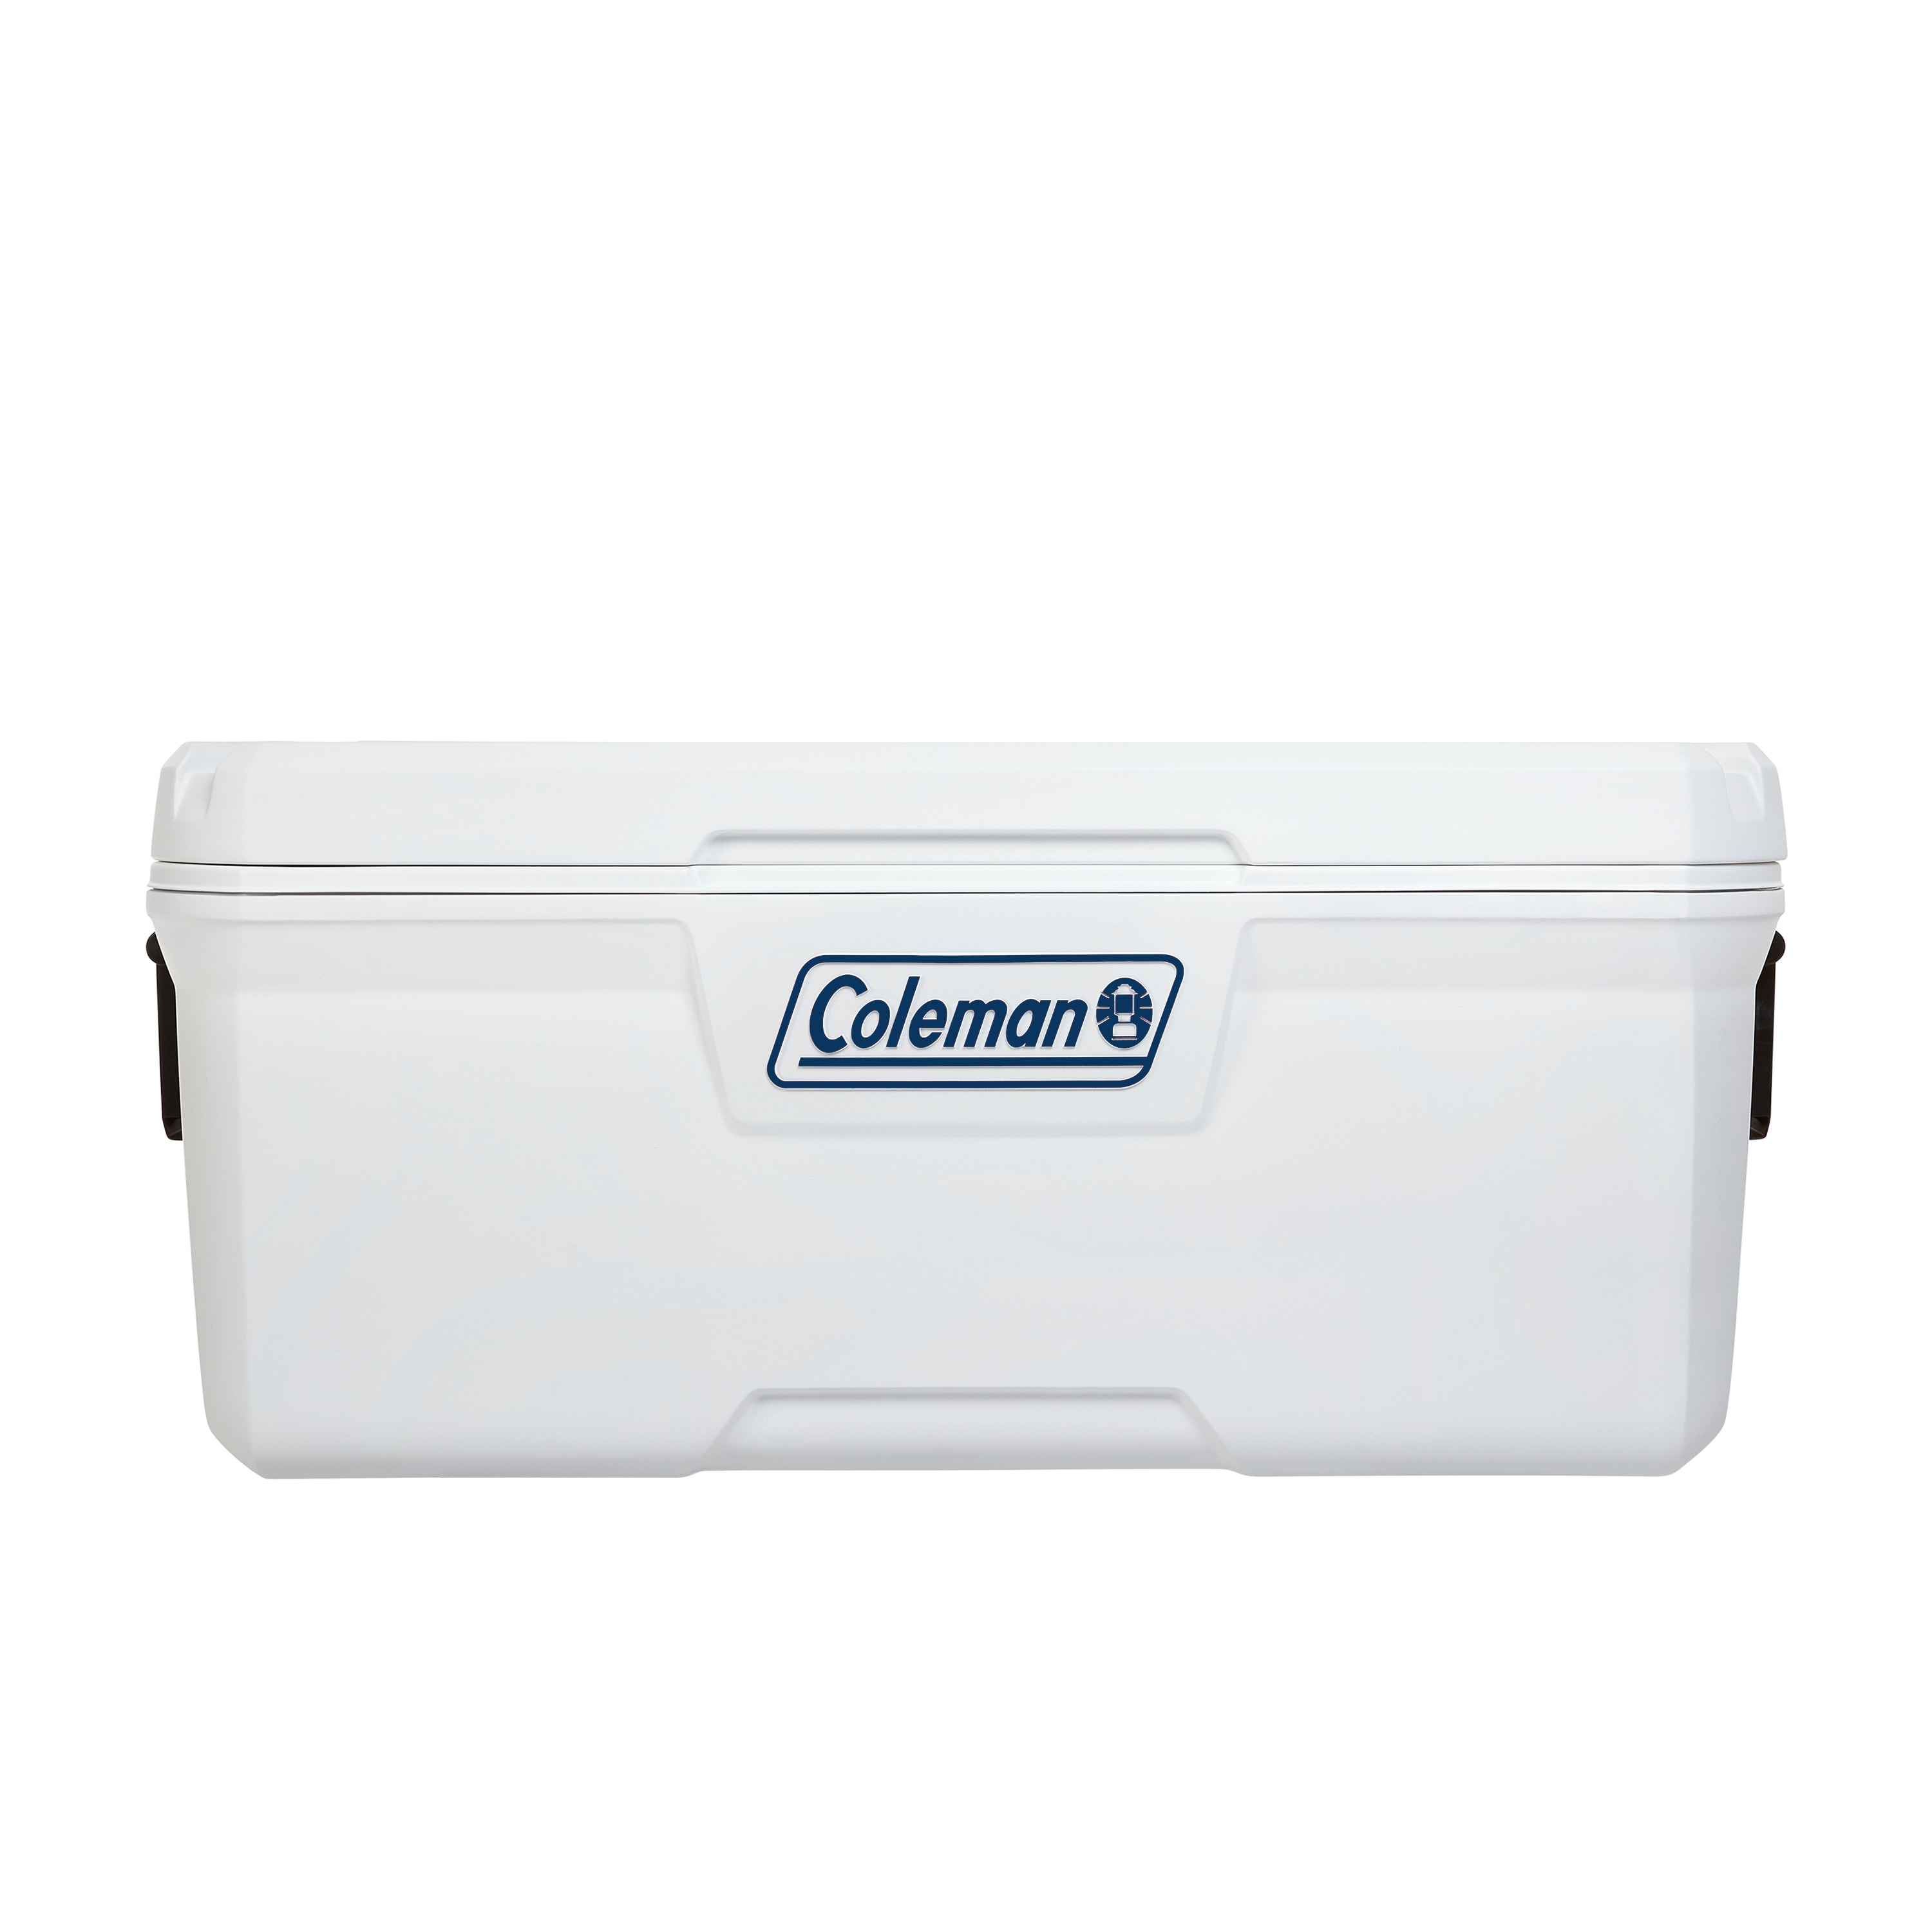 Coastal Thick Insulation Outdoor Ice Chest Coleman Extreme Marine Cooler 70 Qt 